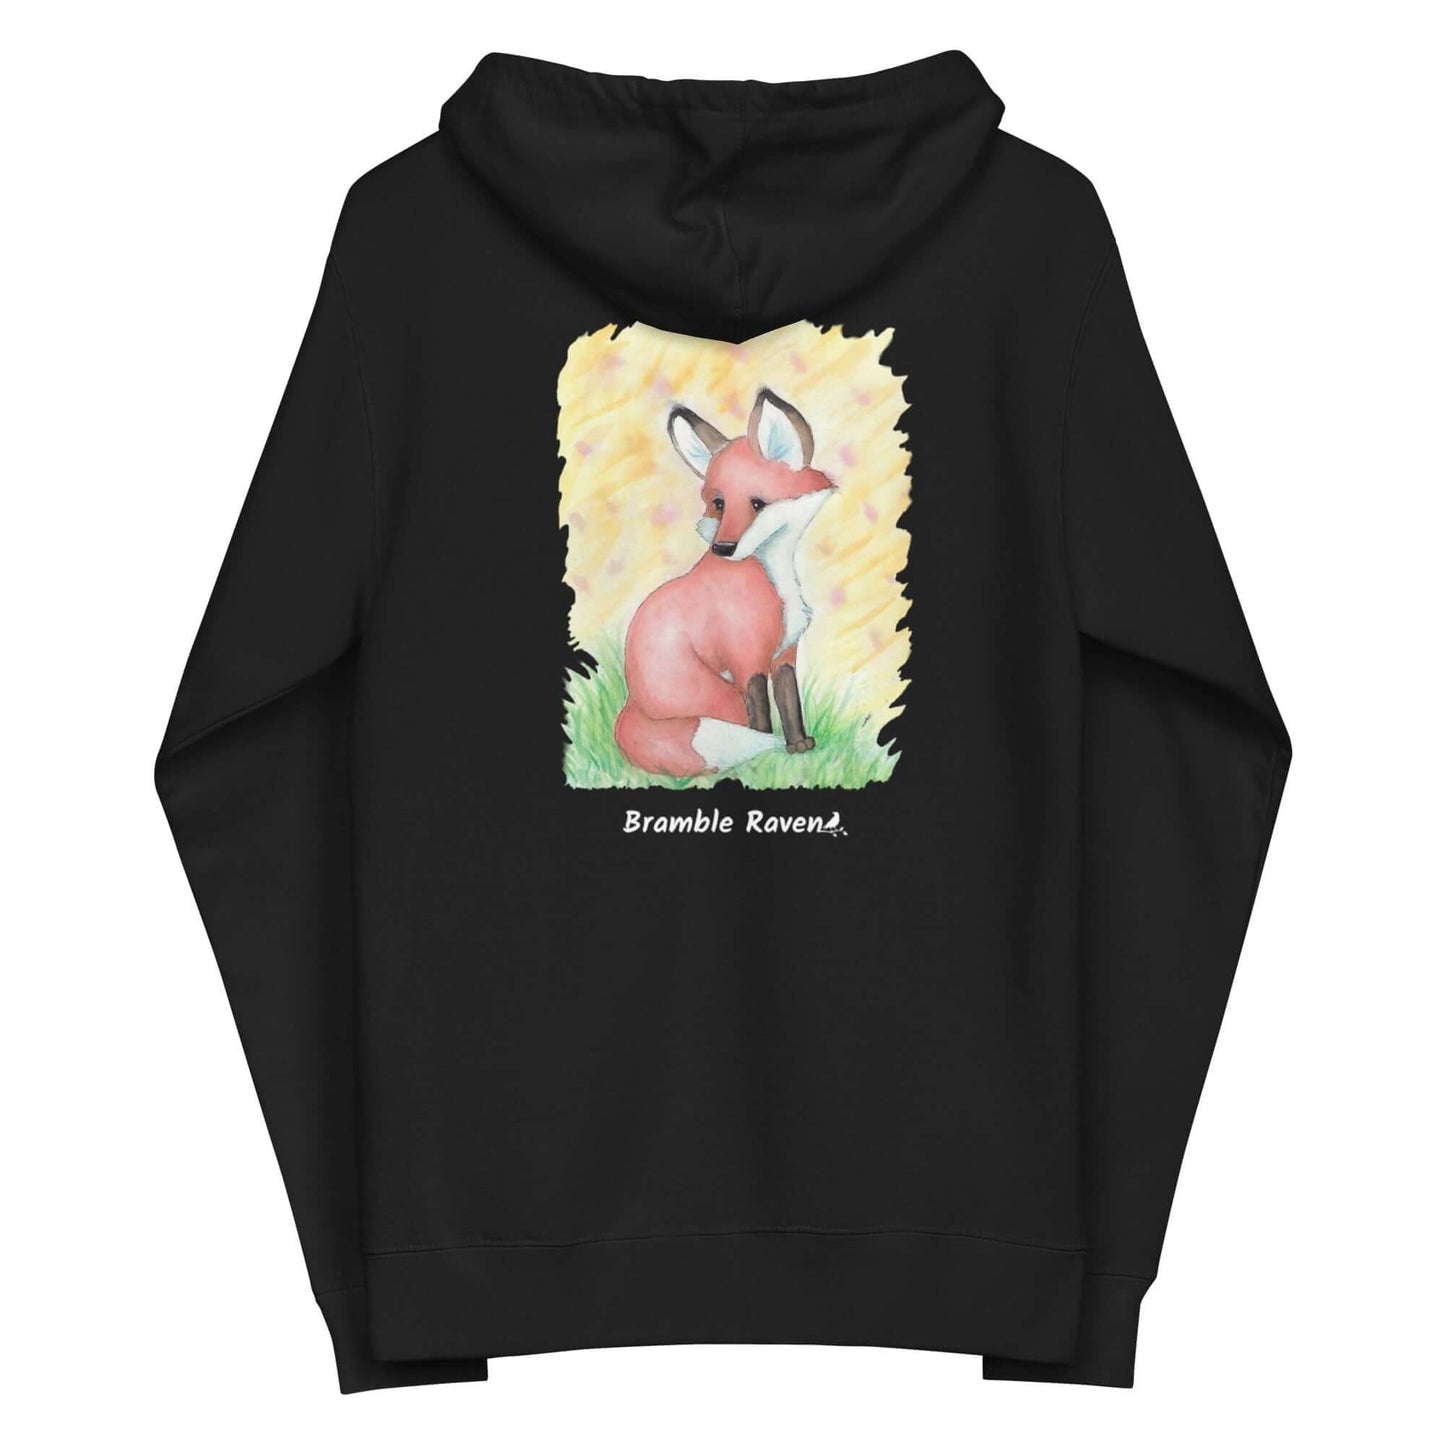 Unisex black colored zip-up fleece-lined hoodie. Features original watercolor painting of a fox sitting in the grass on the back of the hoodie.